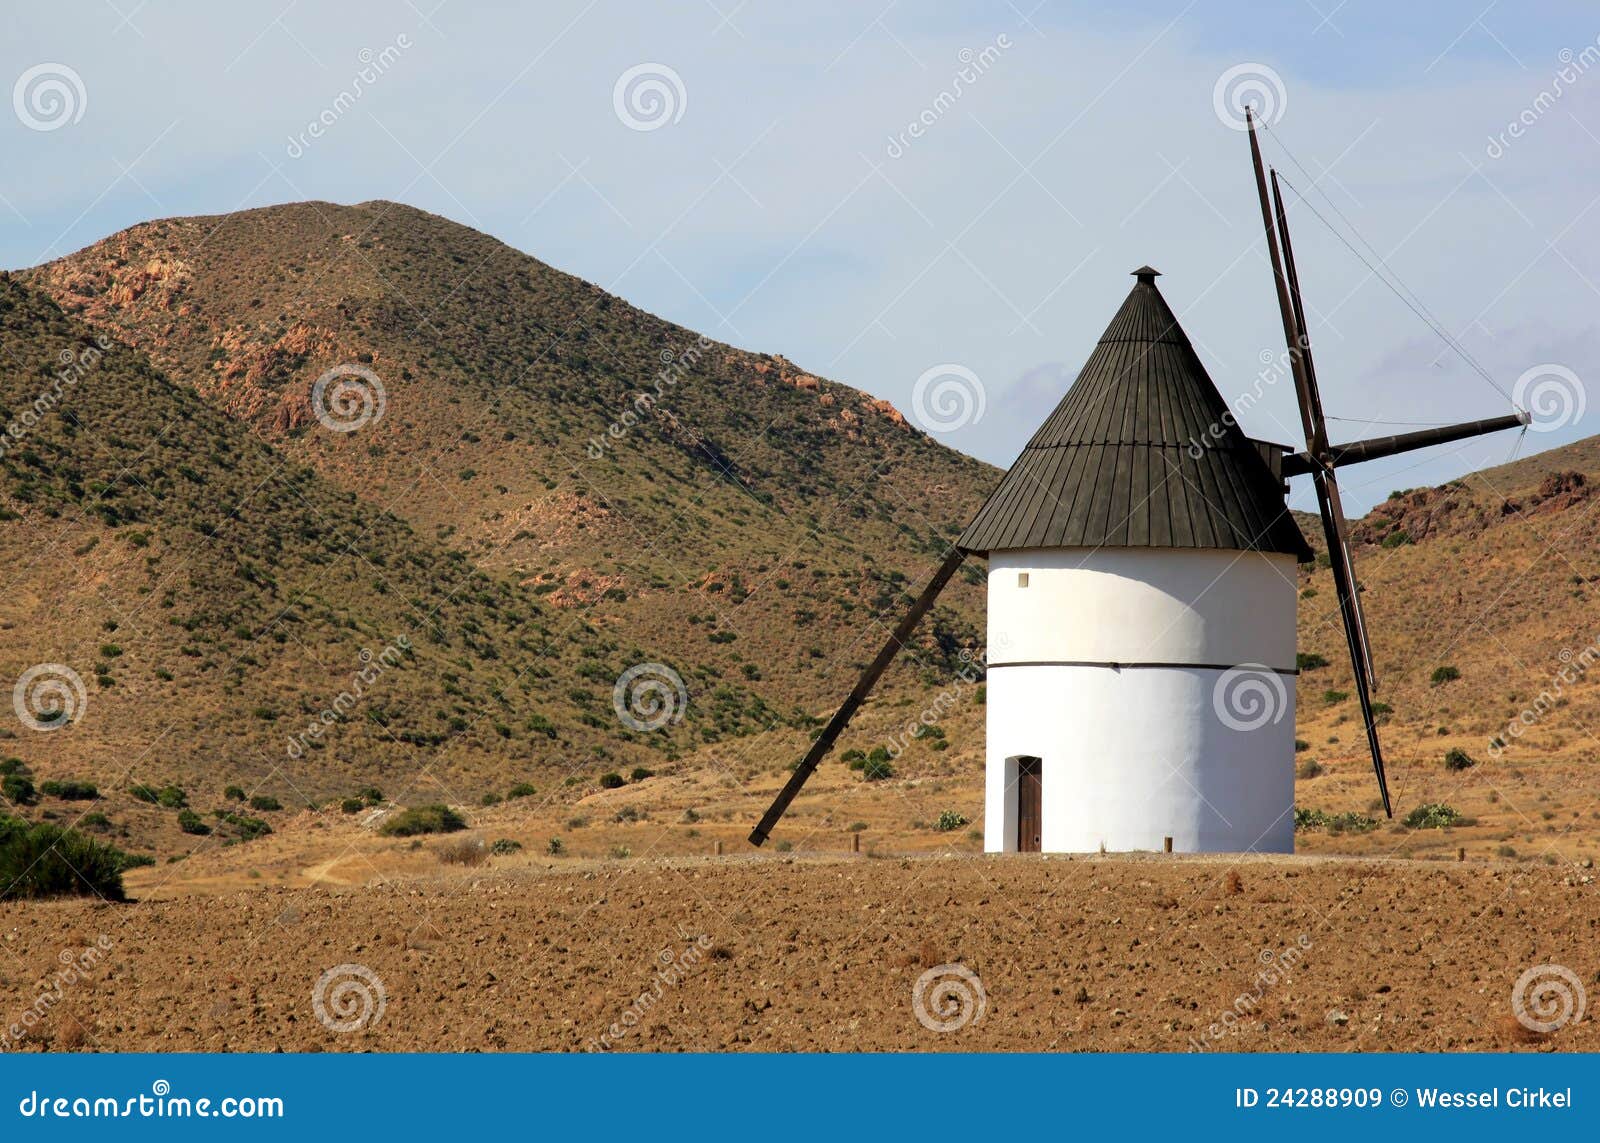 ancient mill in pozo de los frailes, andalusia